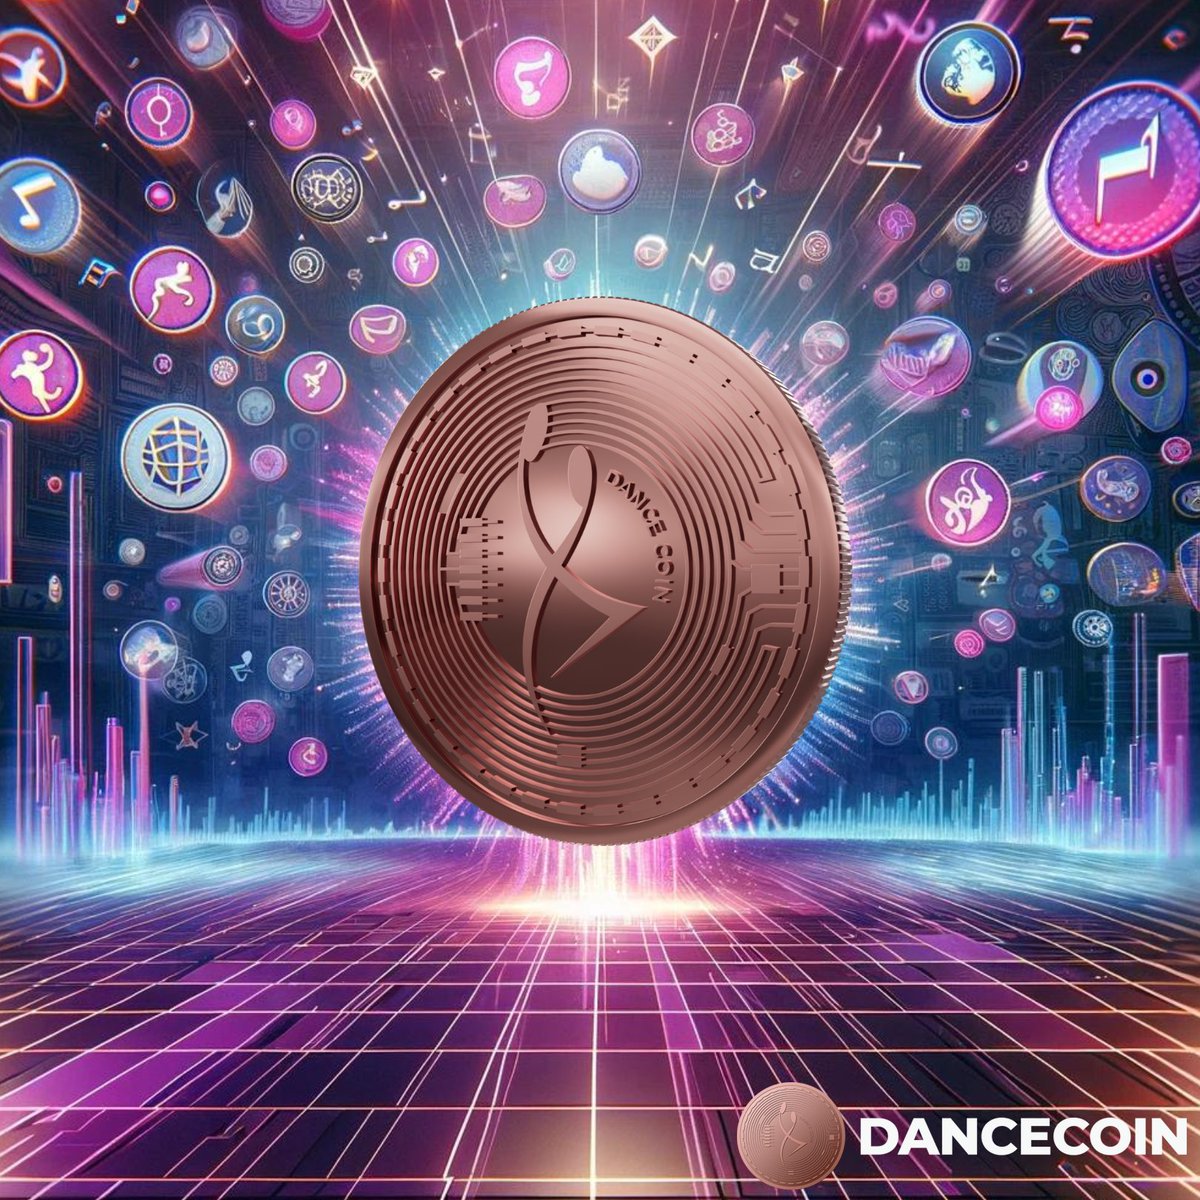 ✨ Ready to be part of the dance revolution? Join Dance Coin today and start earning for your passion for dance. Your moves deserve more! 🚀👣 #JoinDanceCoin #DanceEarn